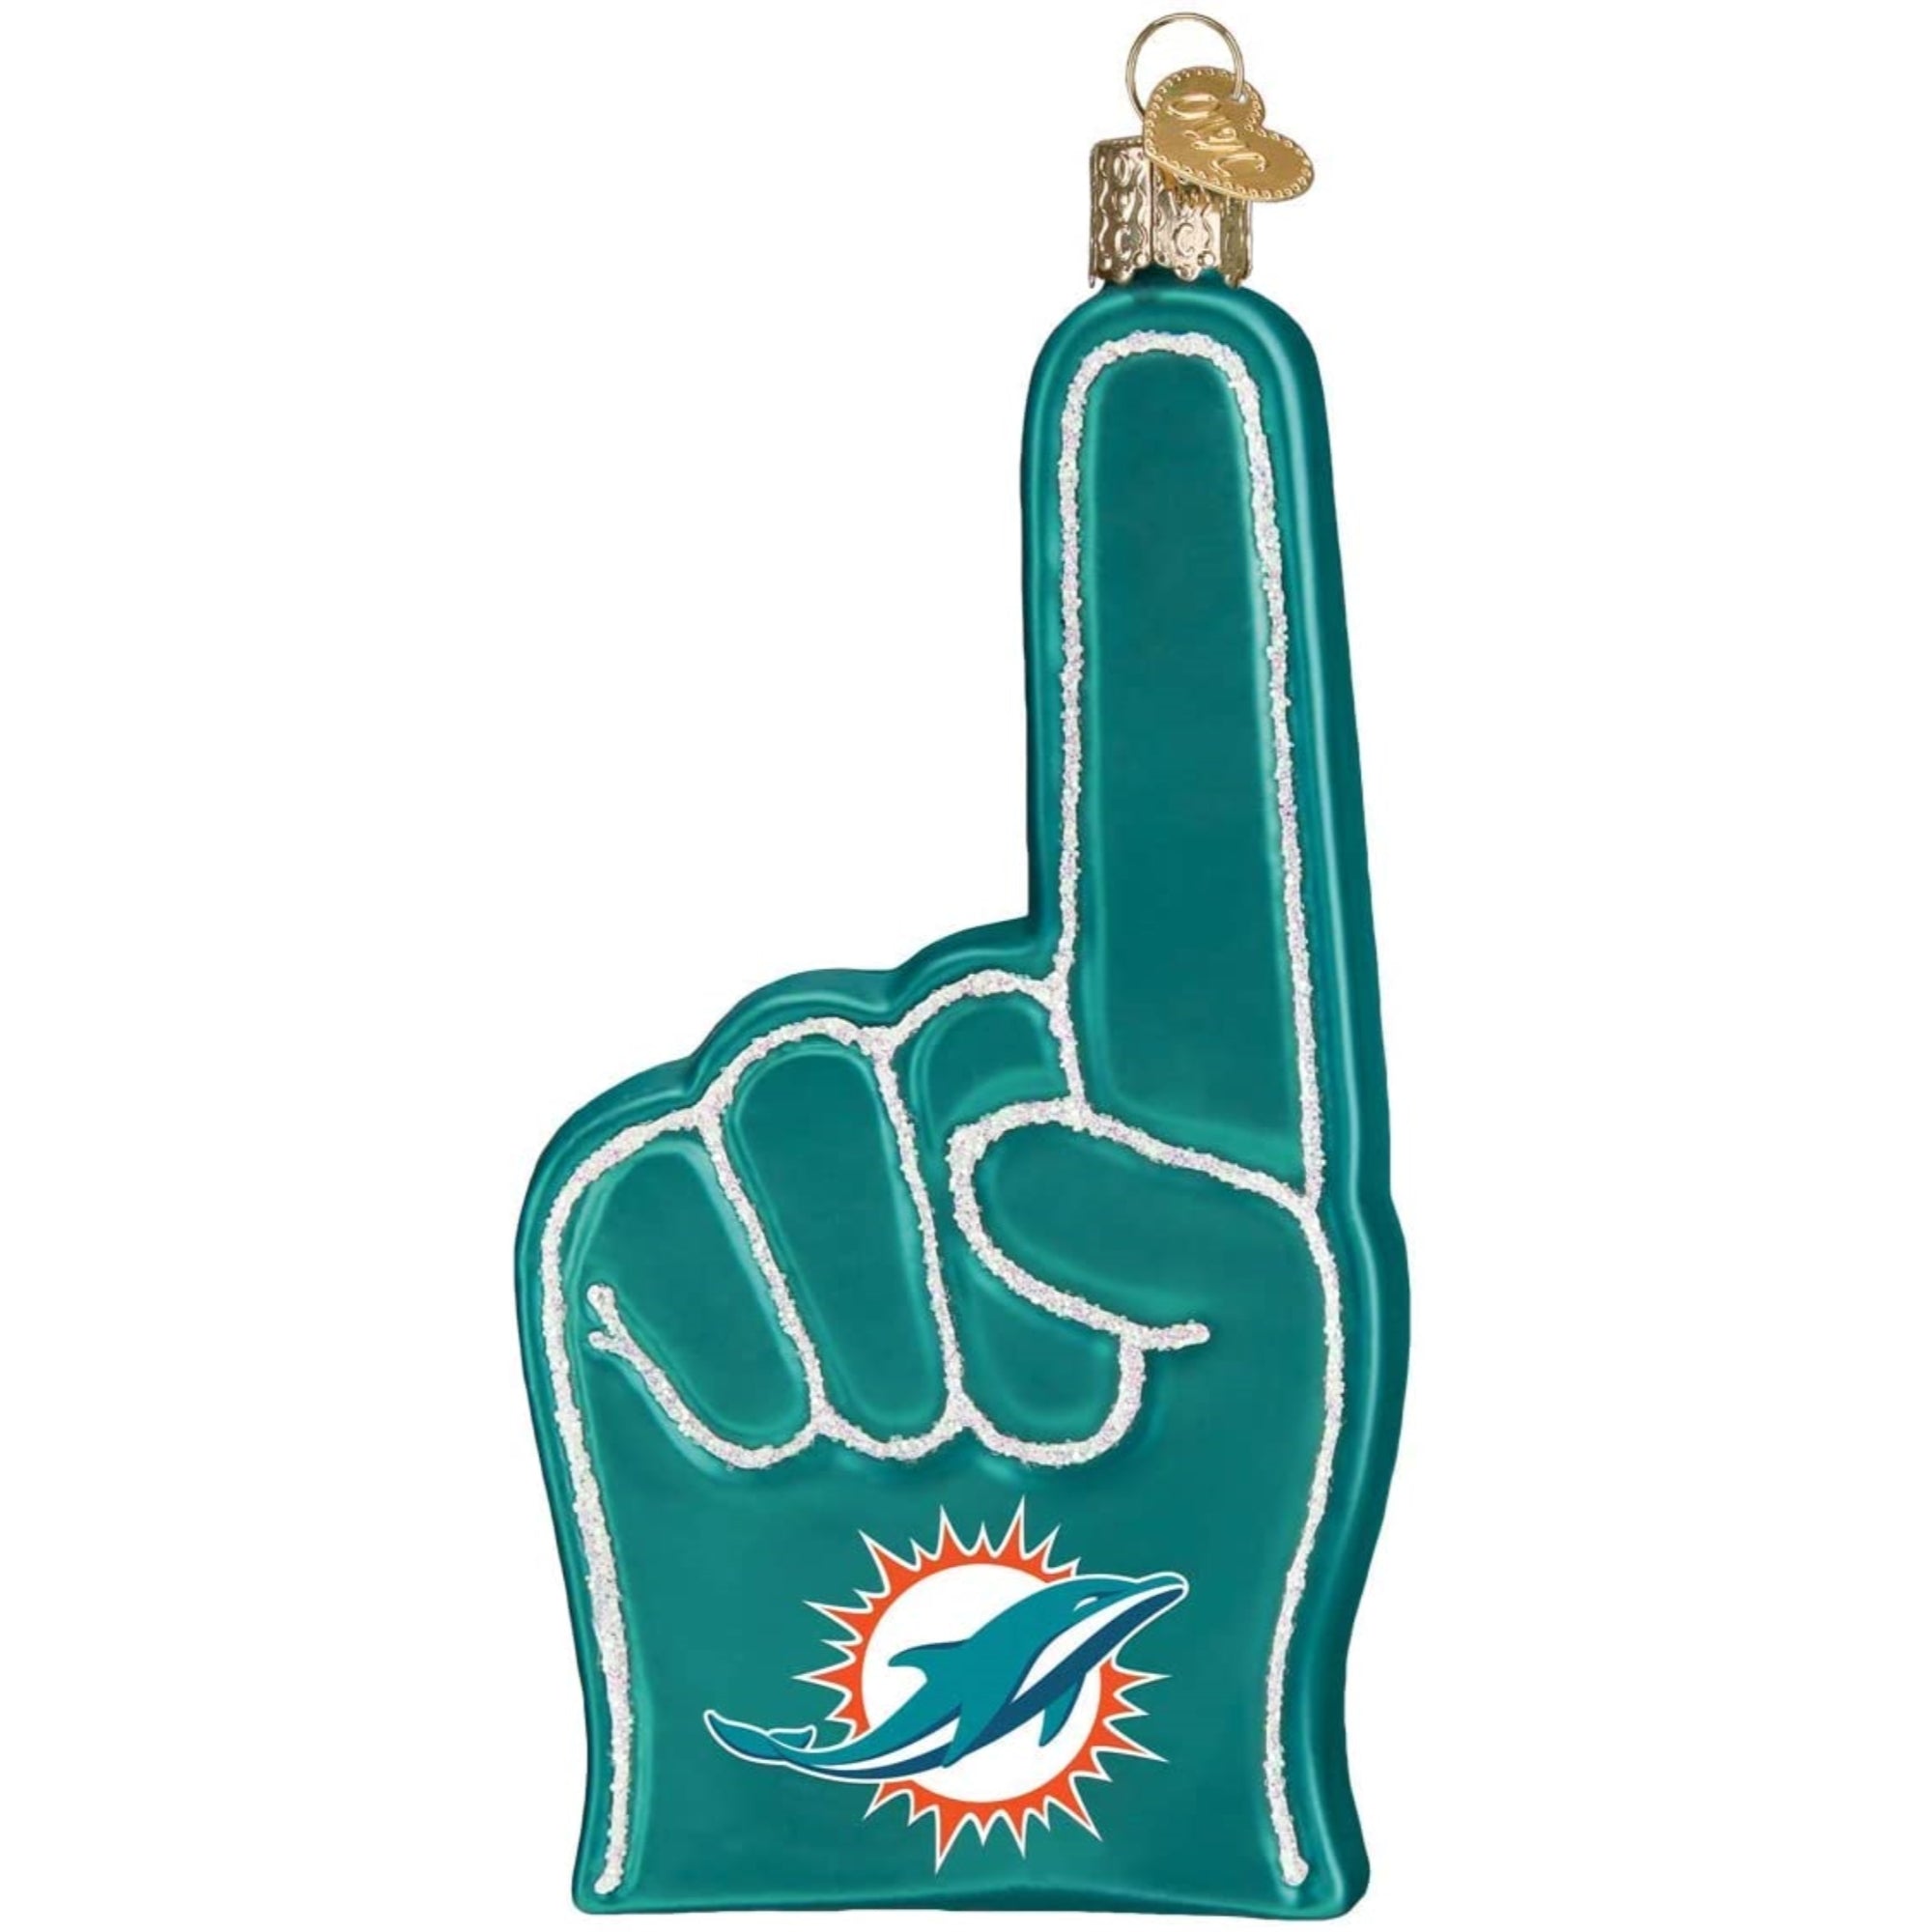 Old World Christmas Miami Dolphins Foam Finger Ornament For Christmas Tree